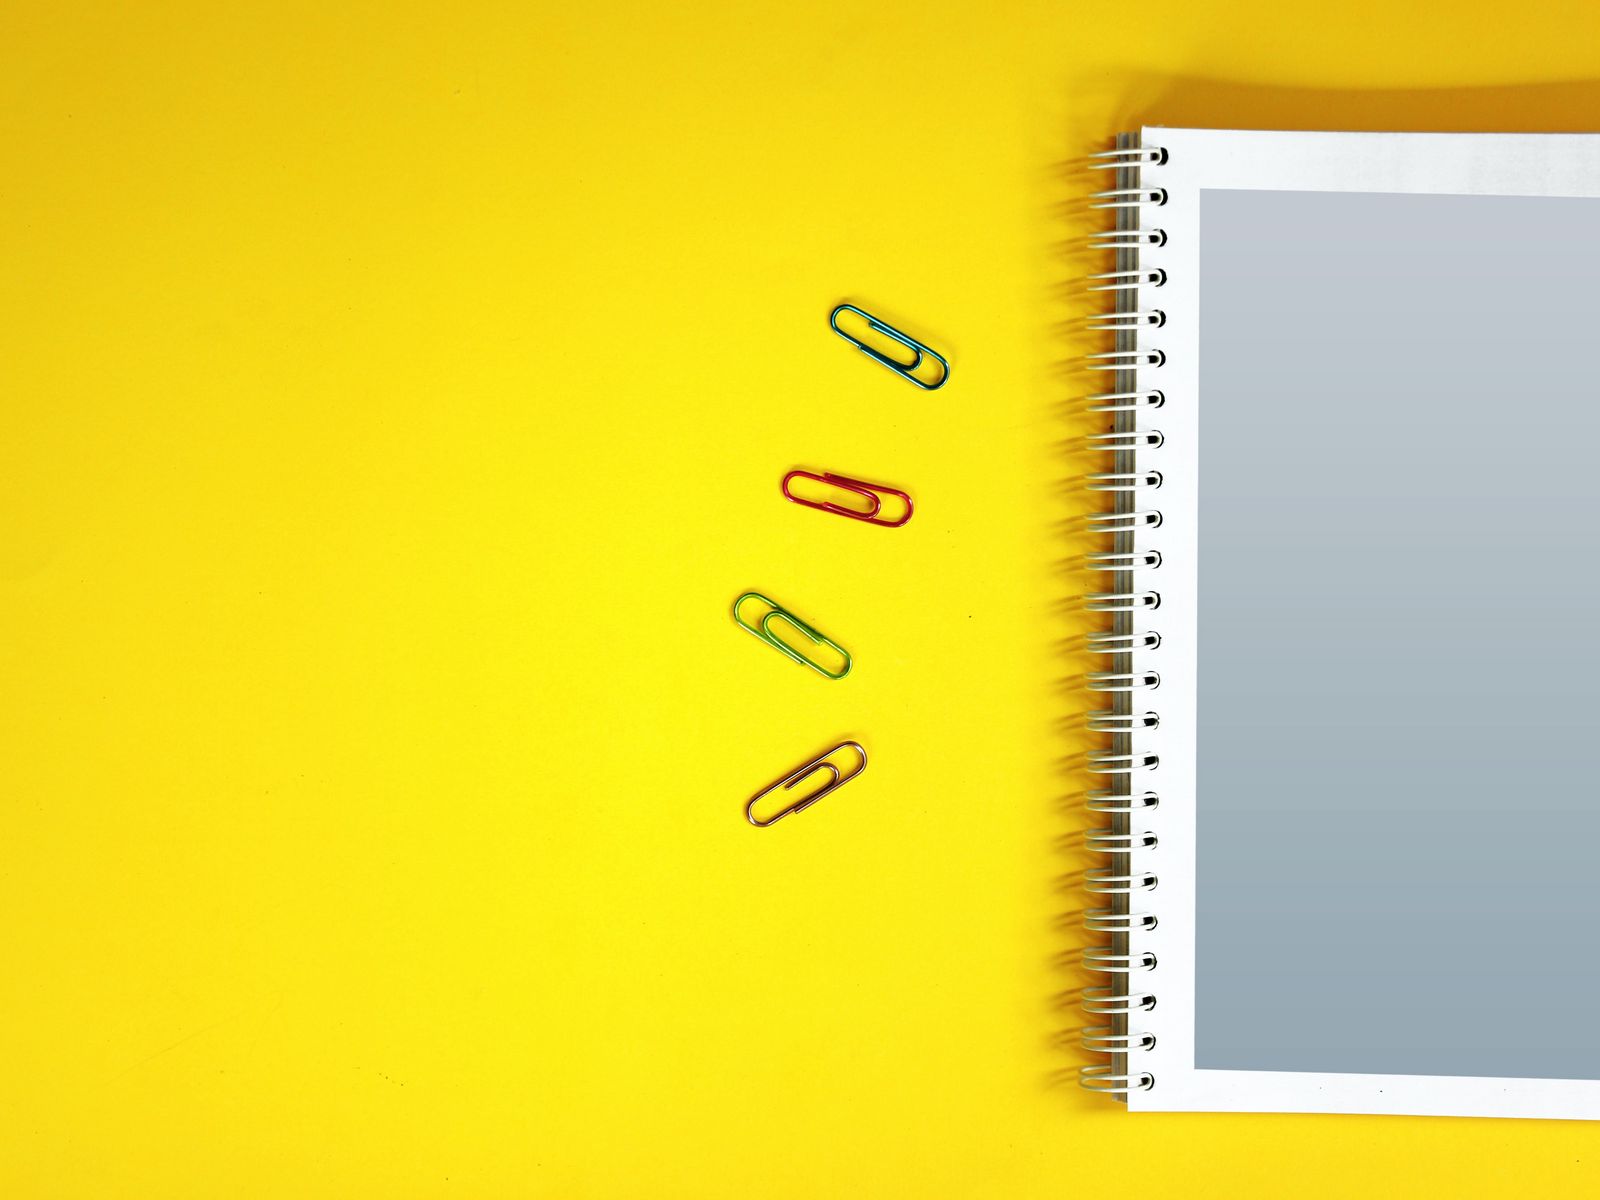 Download wallpaper 1600x1200 notebook, paper clips, surface, yellow standard 4:3 HD background